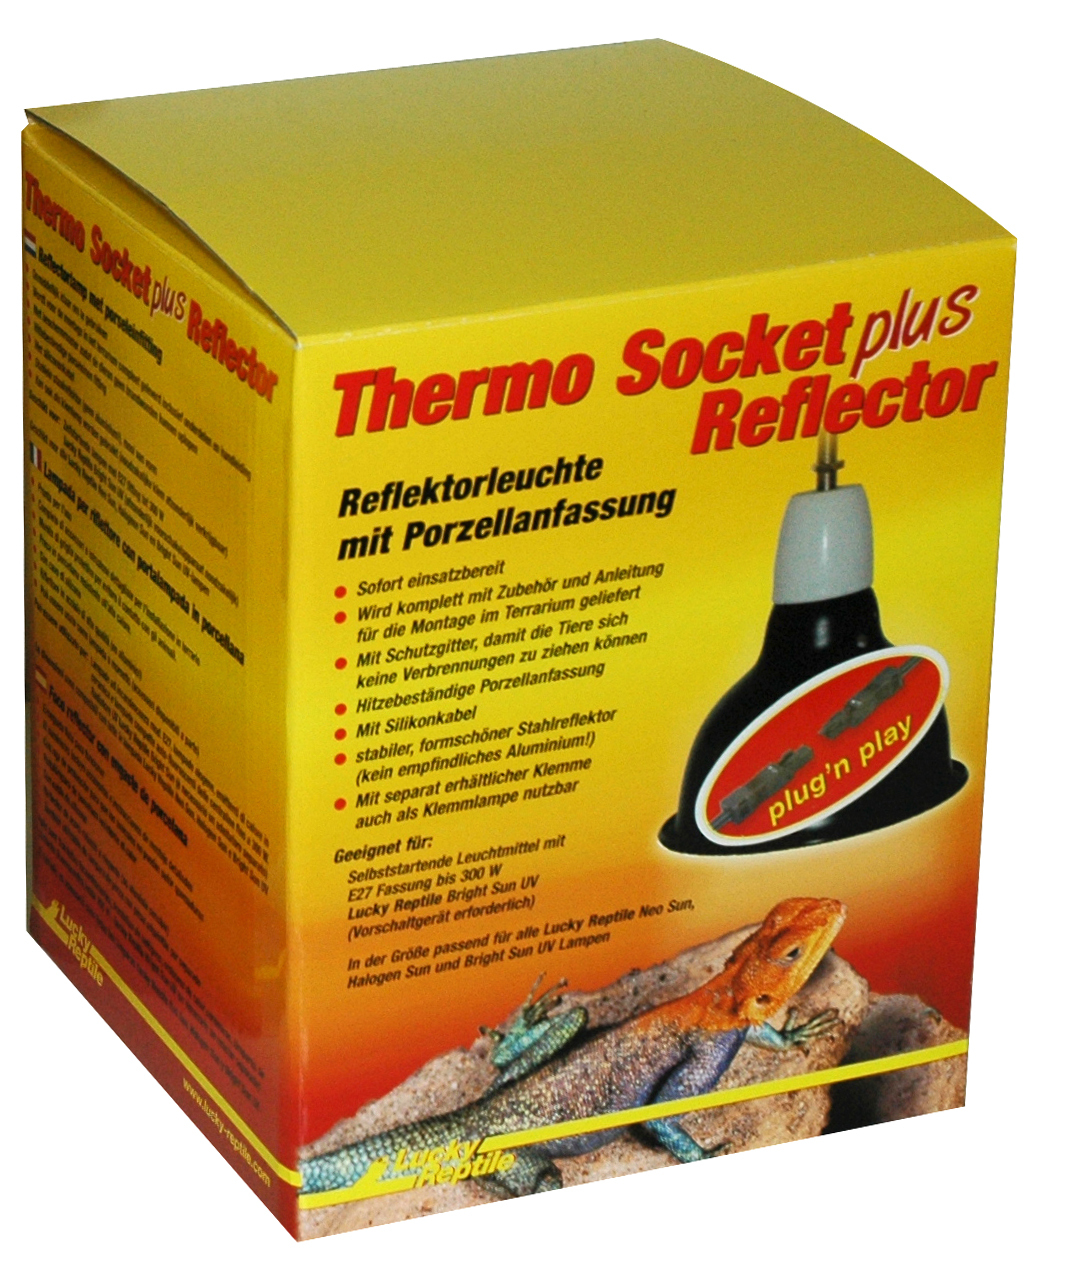 Thermo Socket mit Reflector PRO